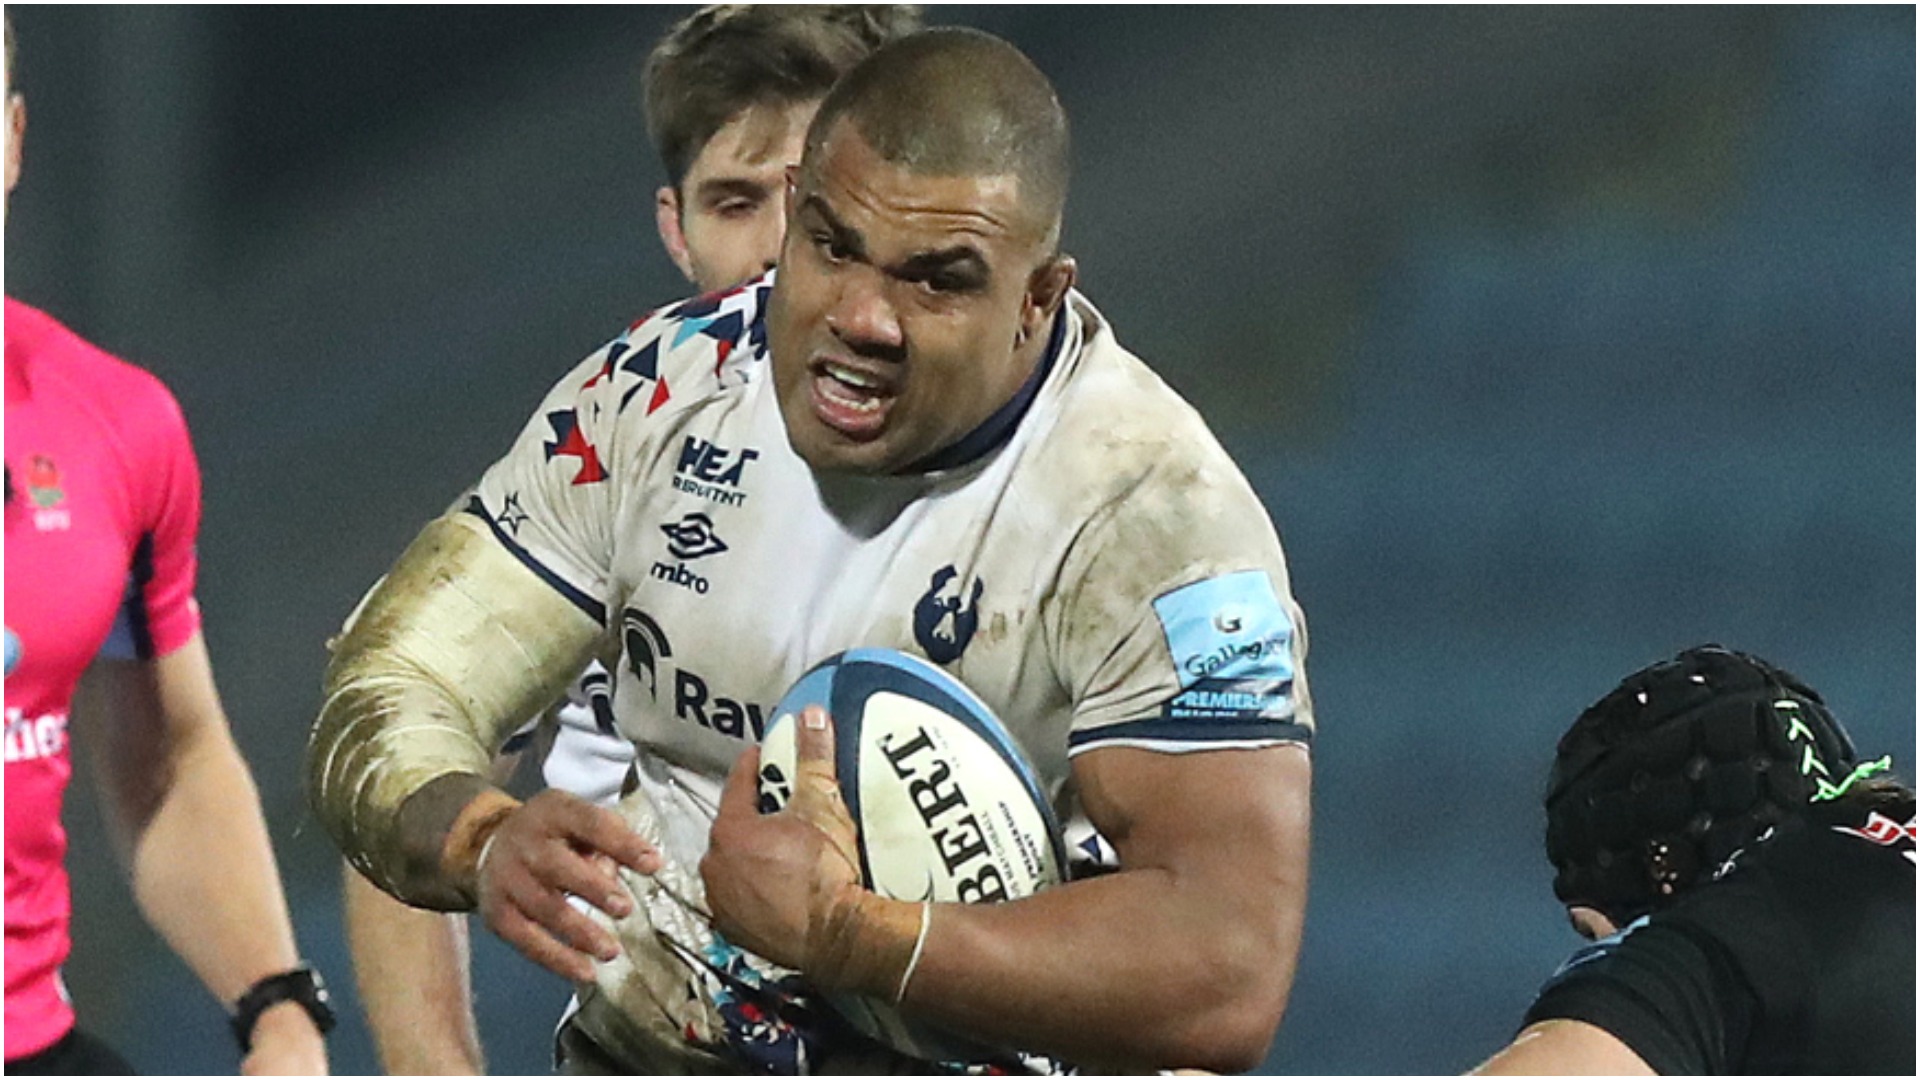 England open their Six Nations campaign against Scotland on February 6 - but Kyle Sinckler will not be available.